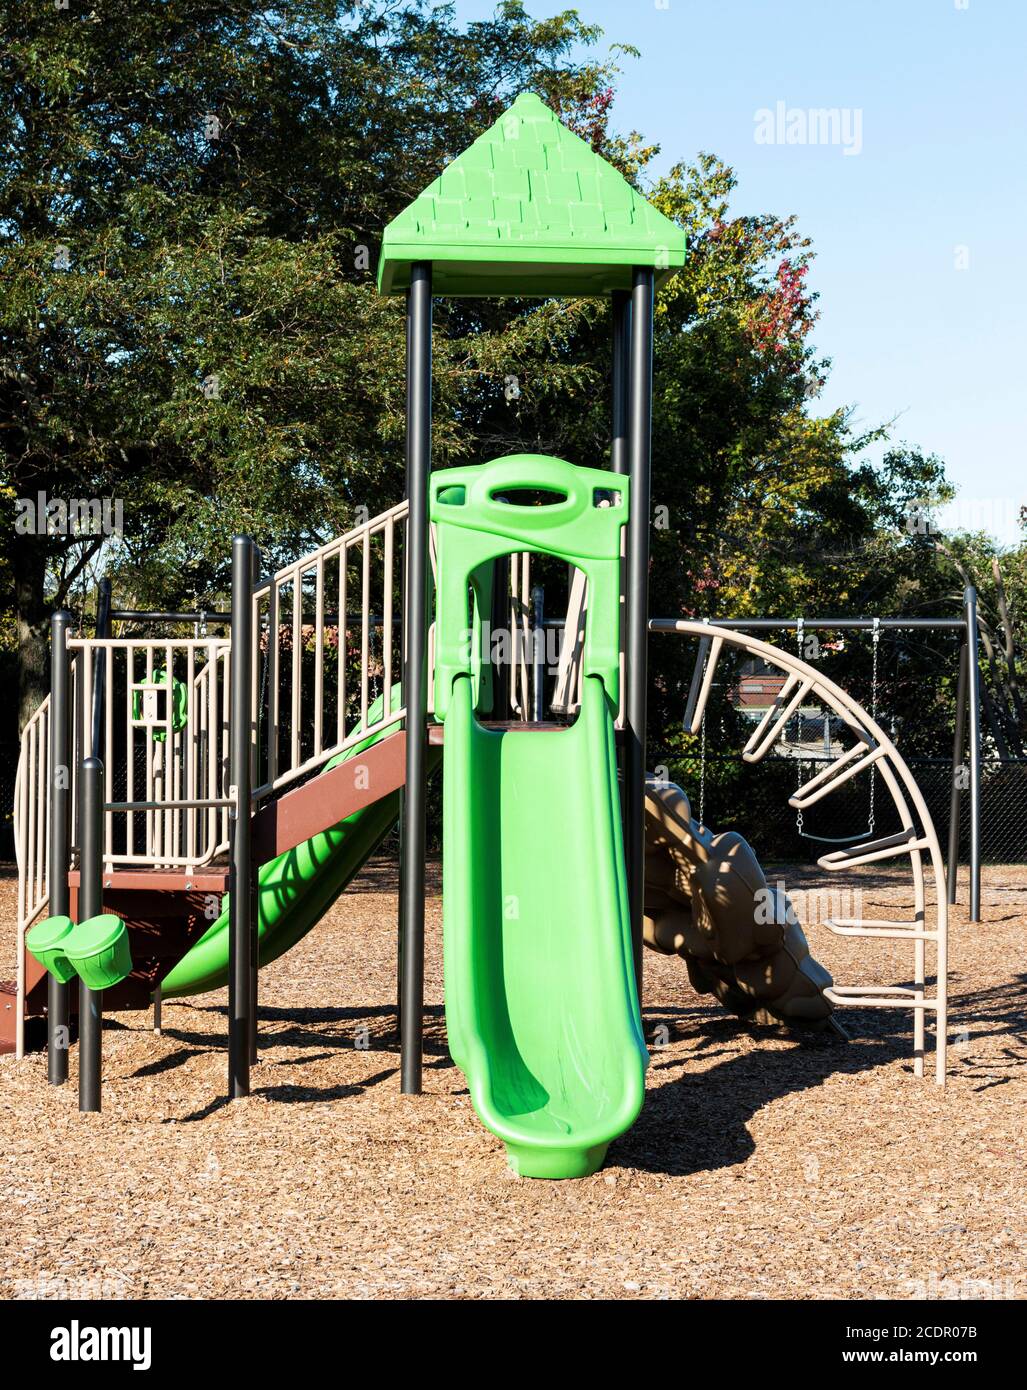 A public playground for kids with green slides and things to climb on. Stock Photo